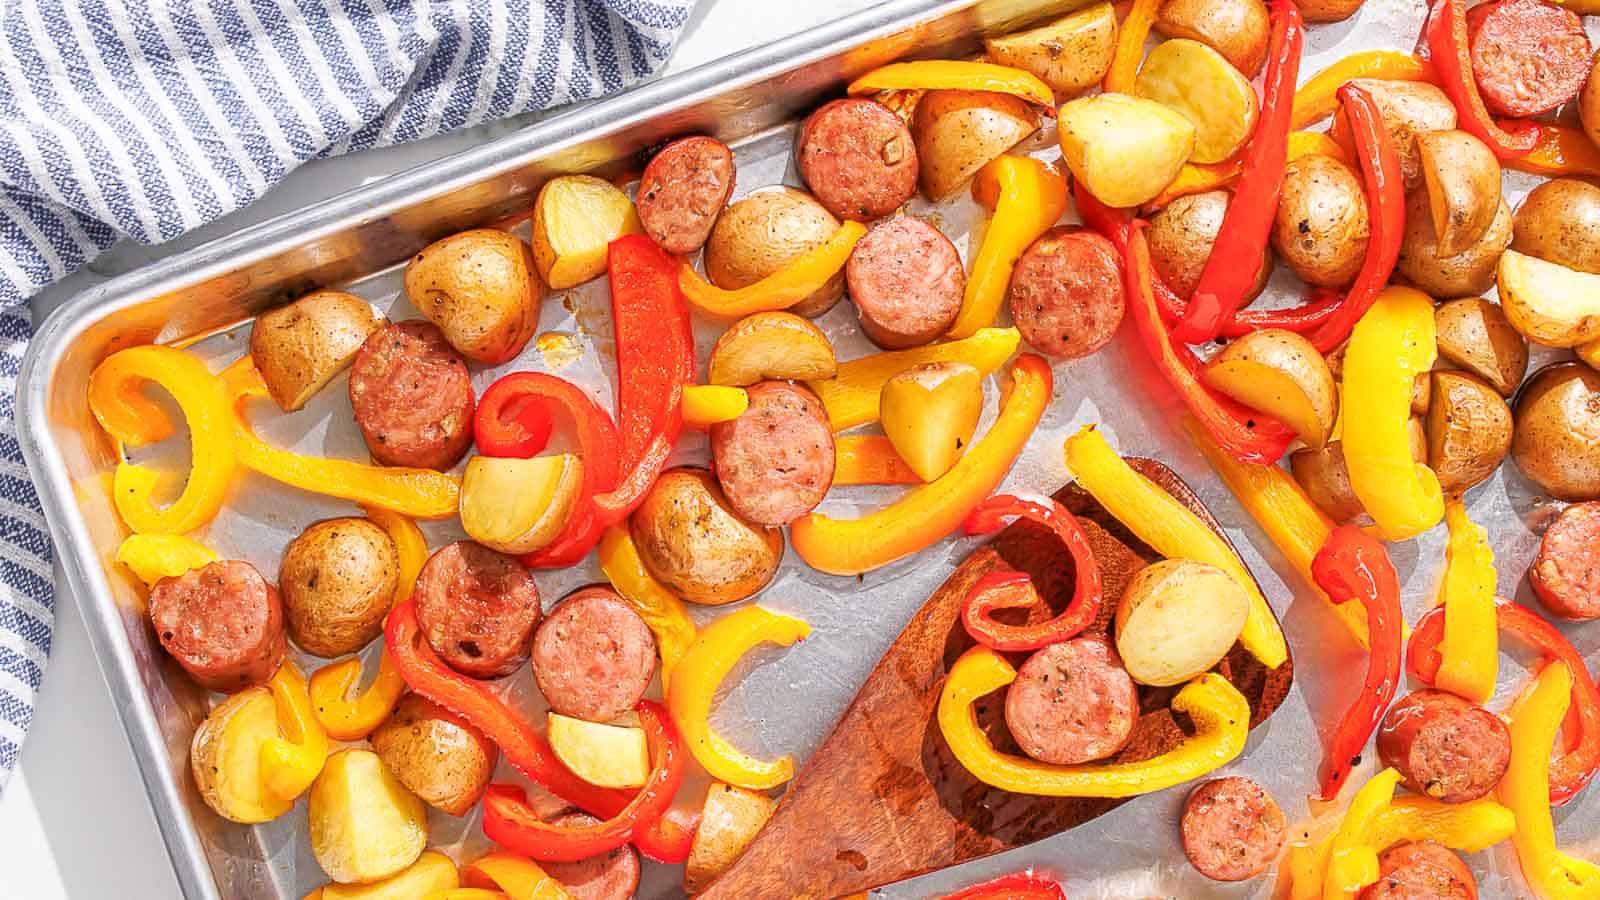 Chicken sausage, potatoes, and bell peppers on a sheet tray.